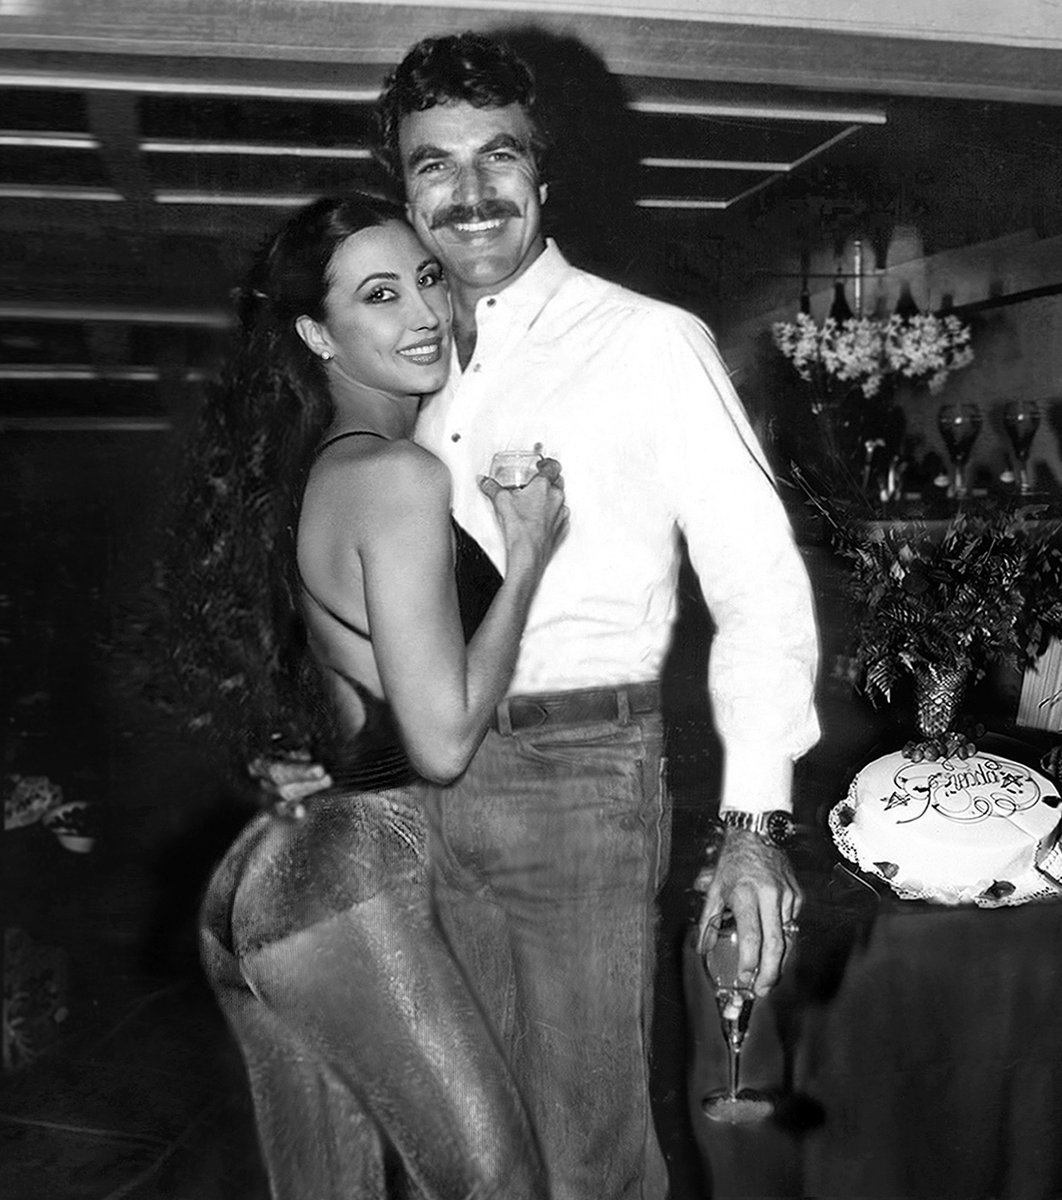 Malibu -- most memorable birthday party in my book VENUS on brendavenus.com & Amazon available now!! #TomSelleck flew in from Hawaii where he was filming, Magnun PI to celebrate my big day. #GRATEFULFRIDAY